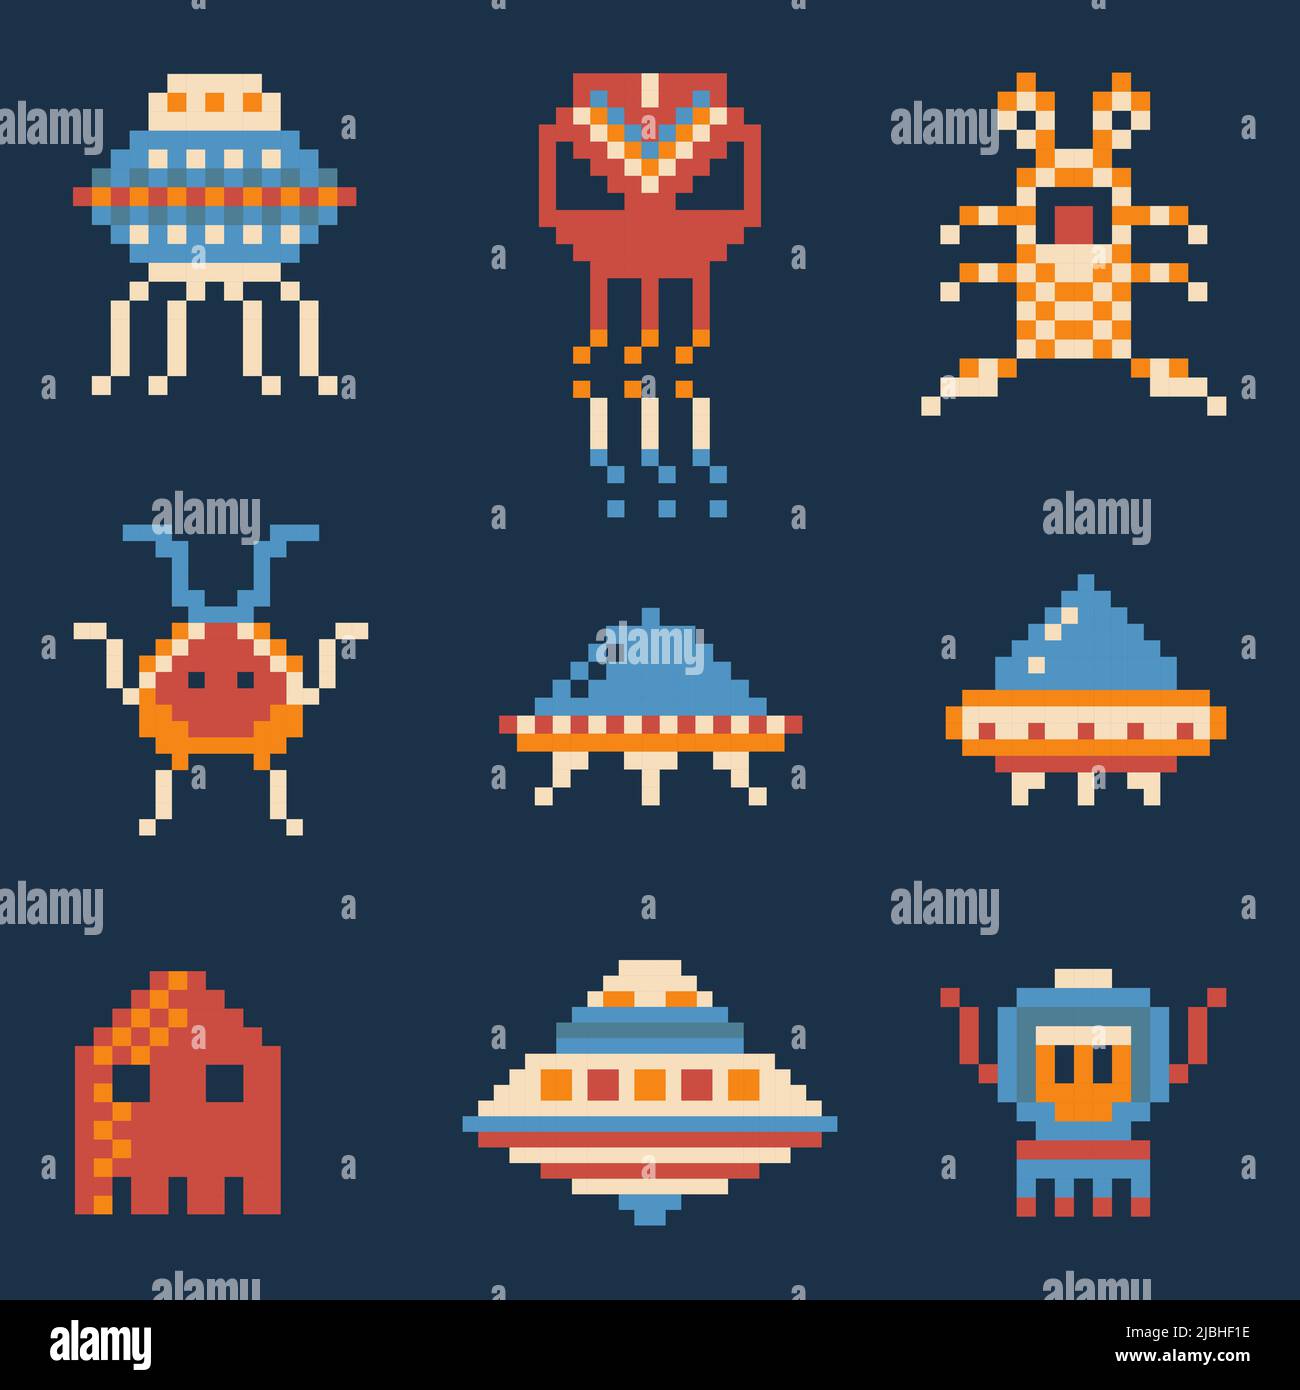 Characters space war game in pixel art style Vector Image